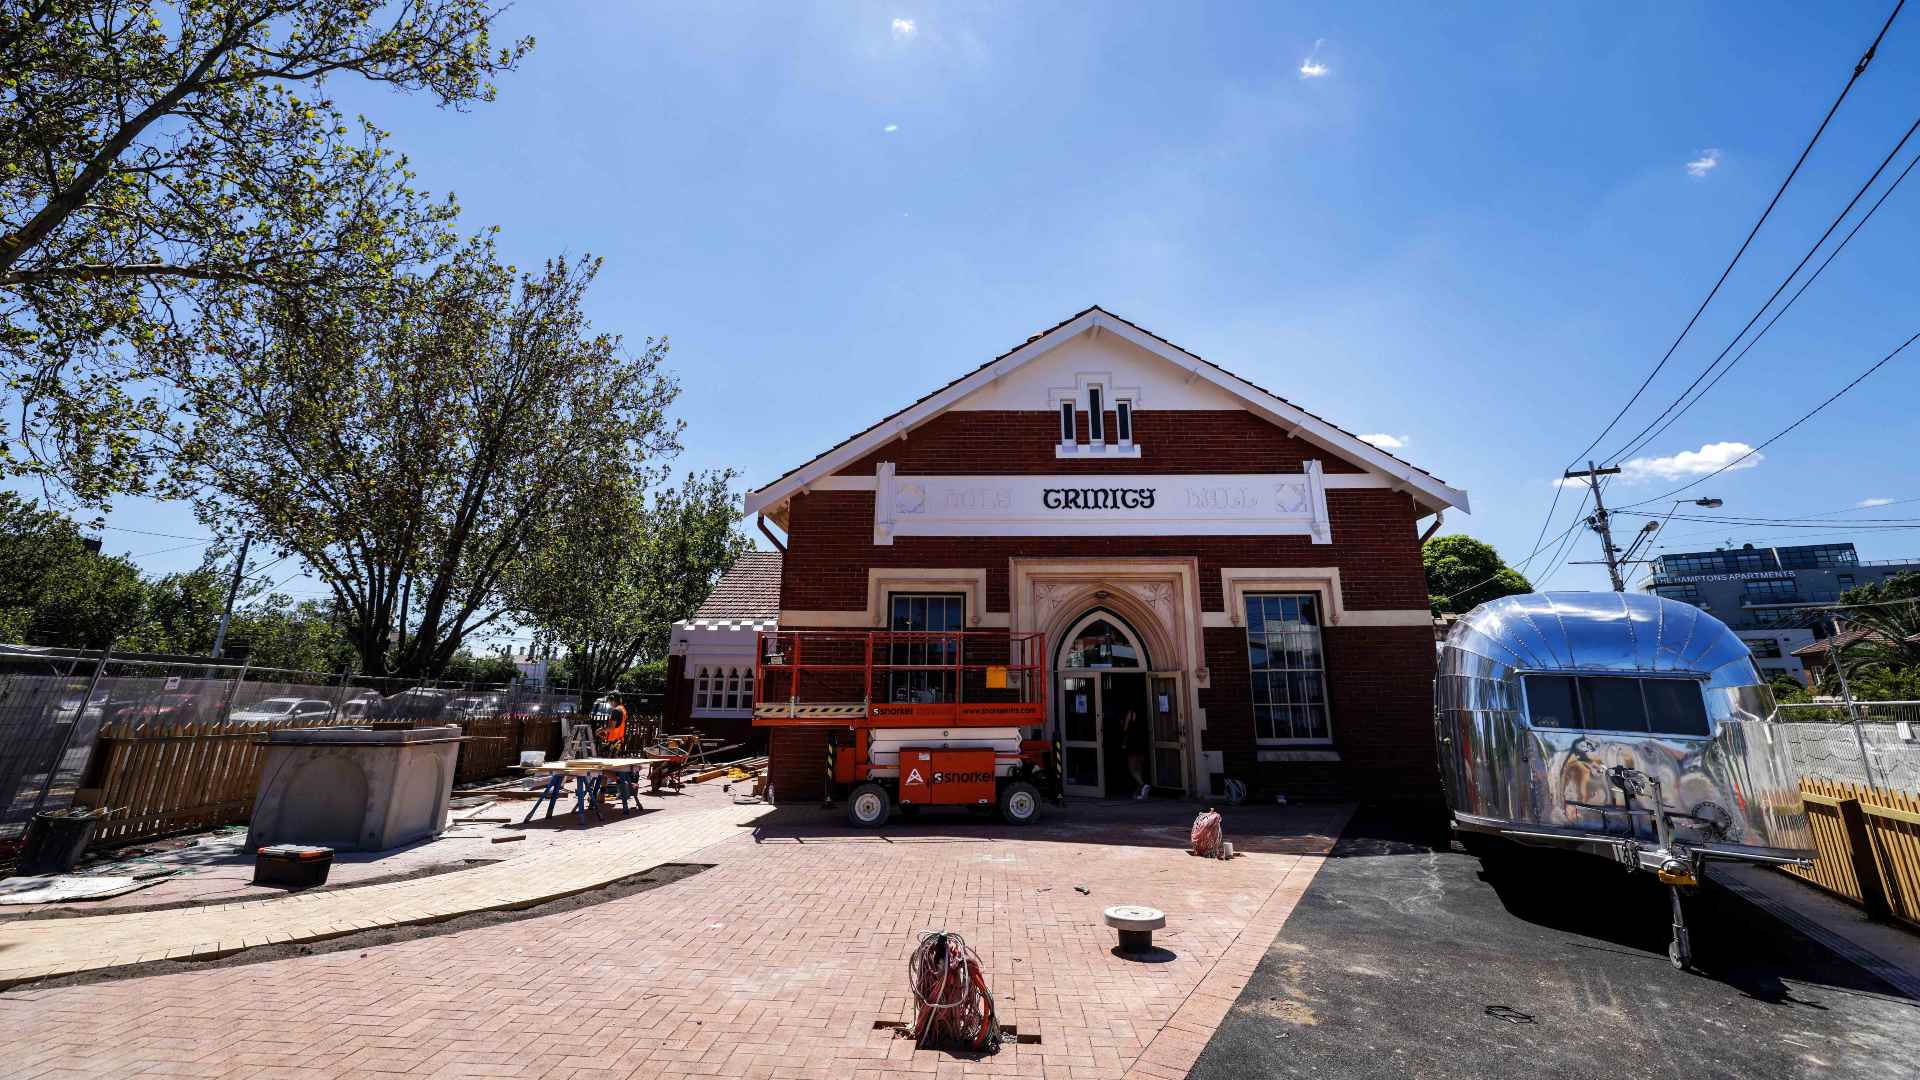 A Former St Kilda Church Hall Is Being Reborn as a Pub and Food Truck Park